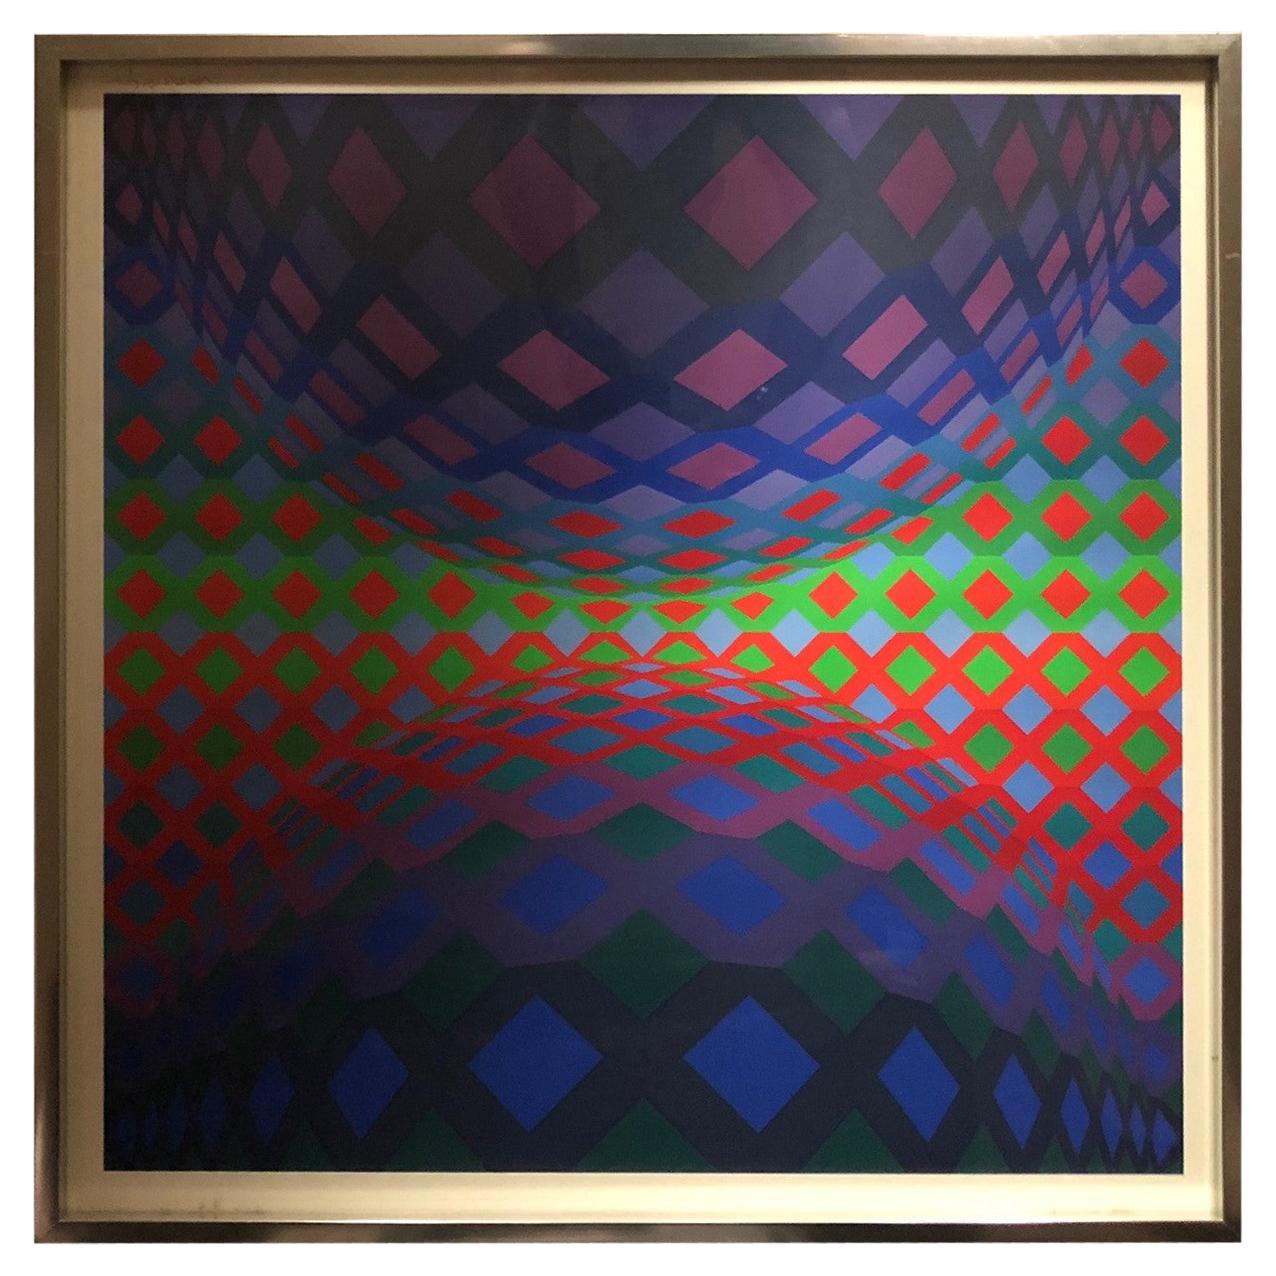 Signed Limited Edition Op Art Serigraph "Reech" by Victor Vasarely 